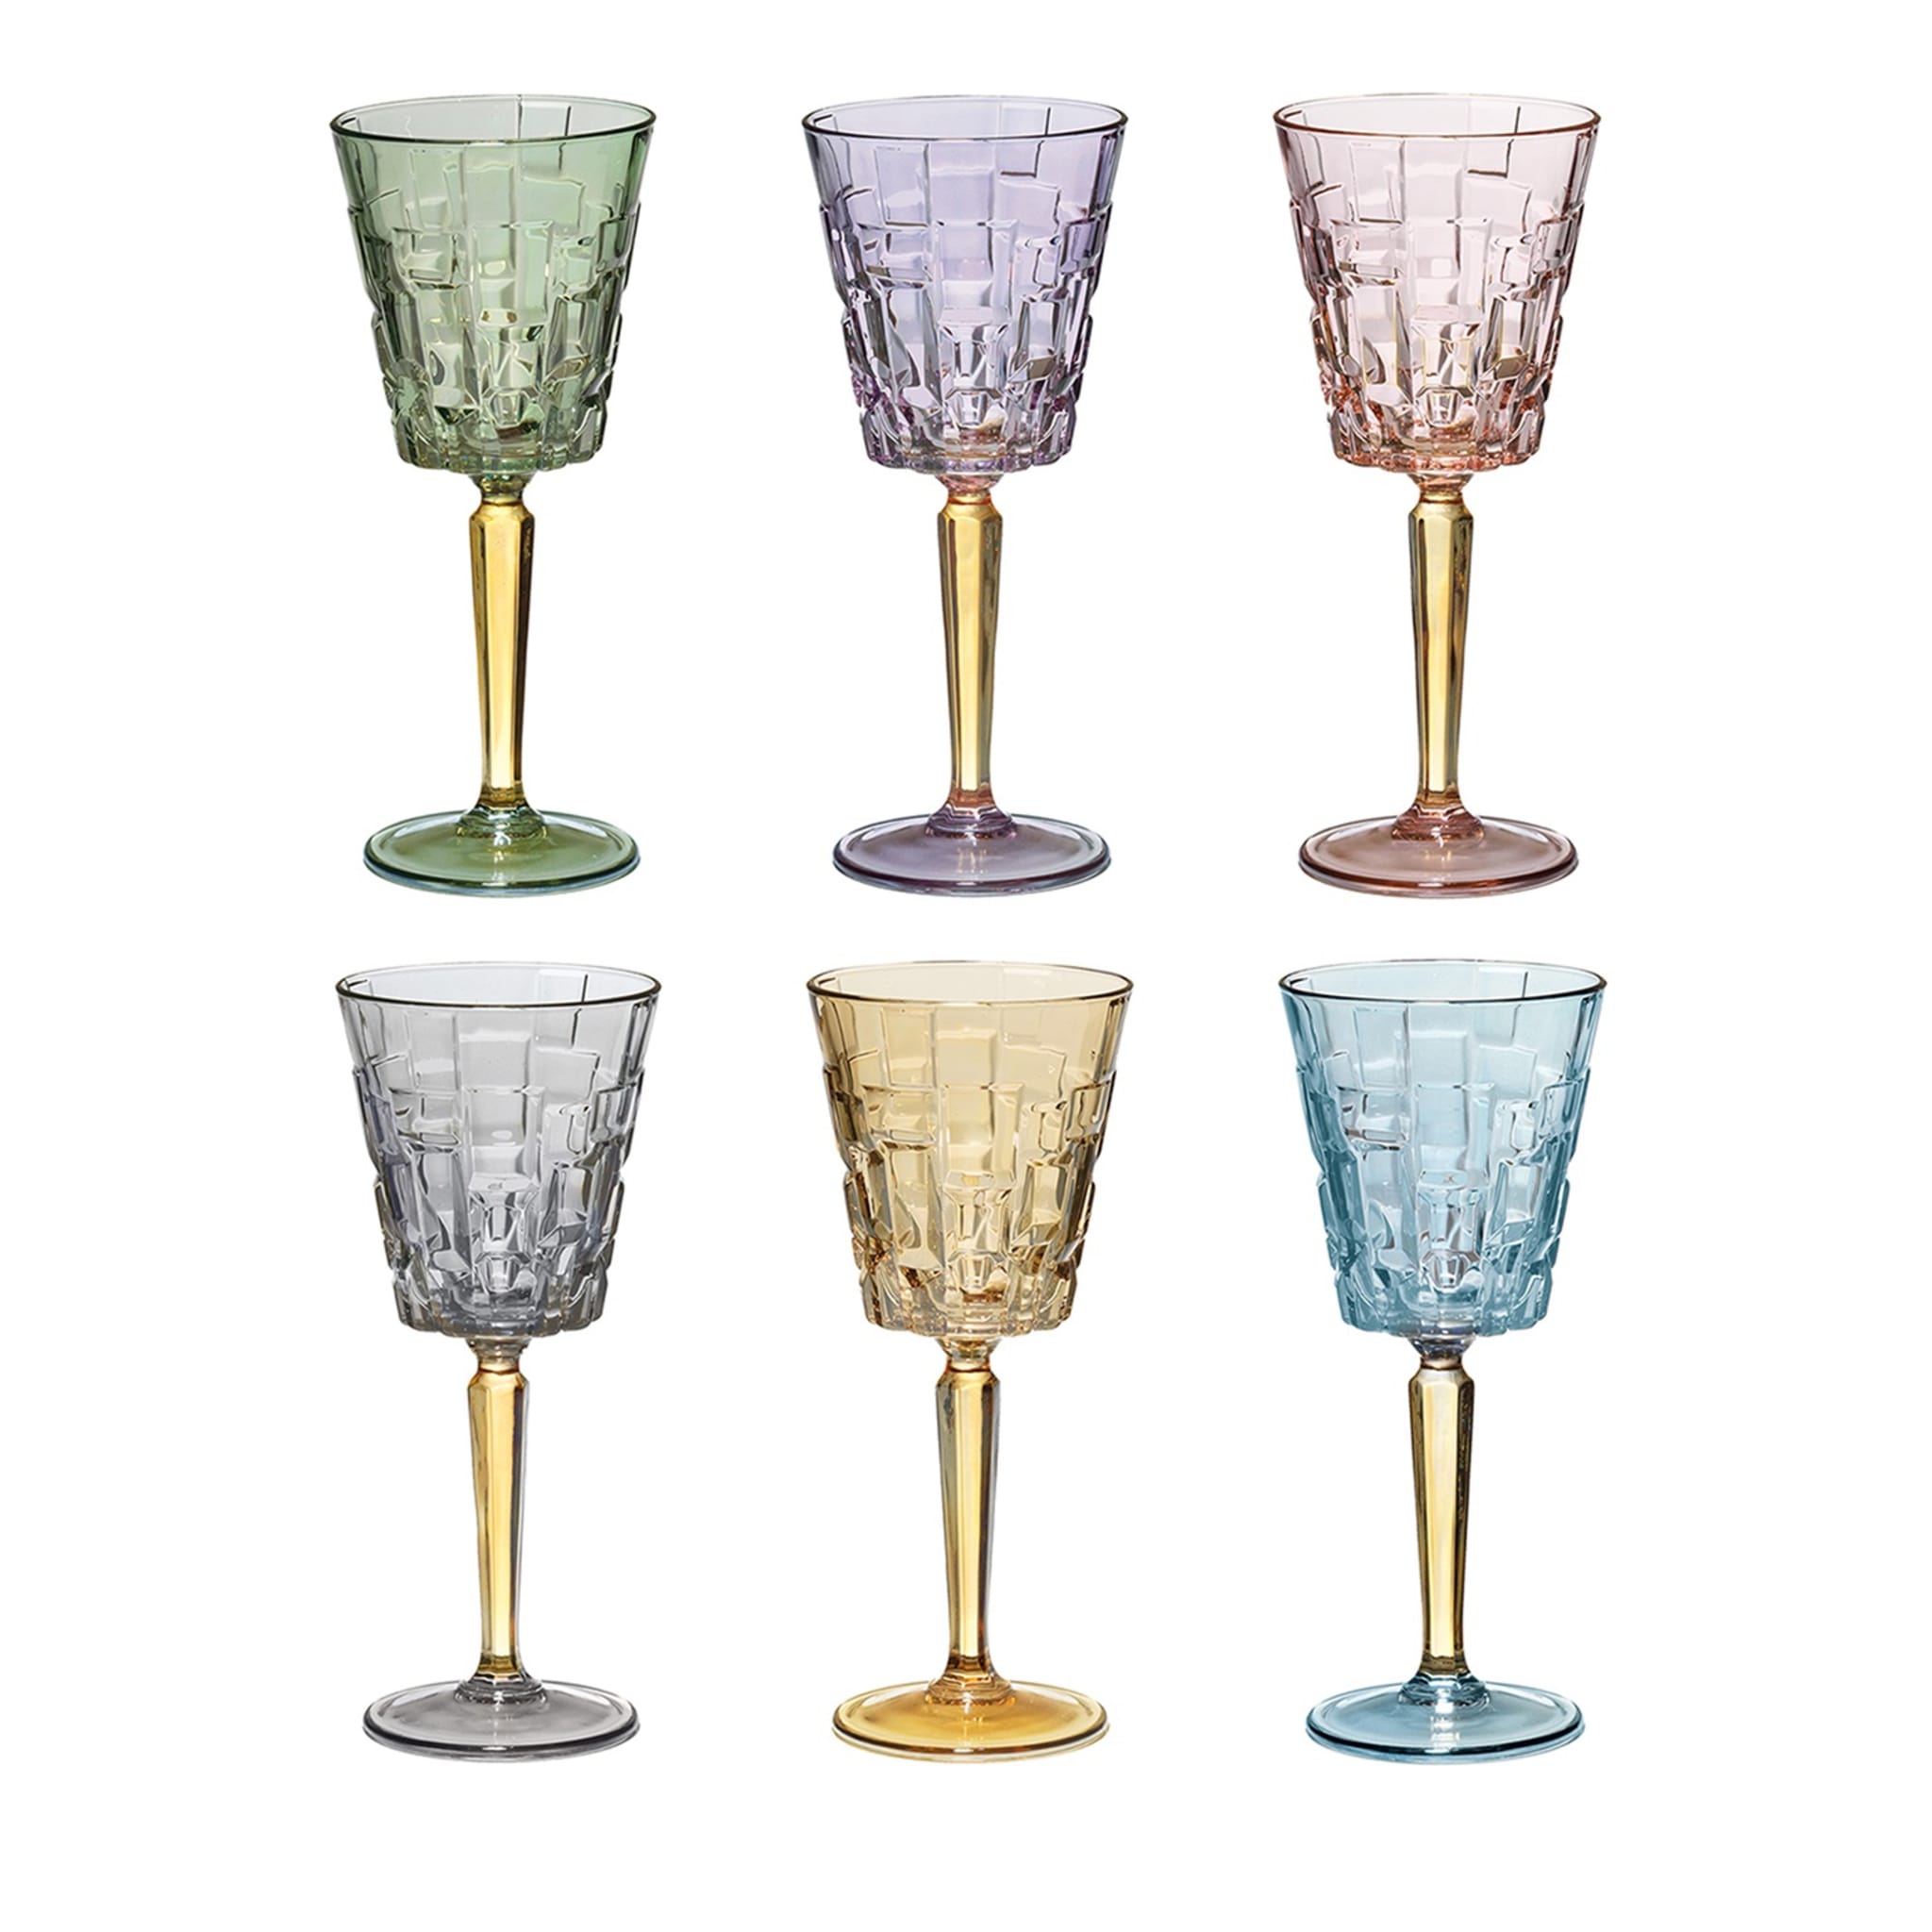 Colored Wine Glasses Set of 6 - Square Wine Glasses with Stem and